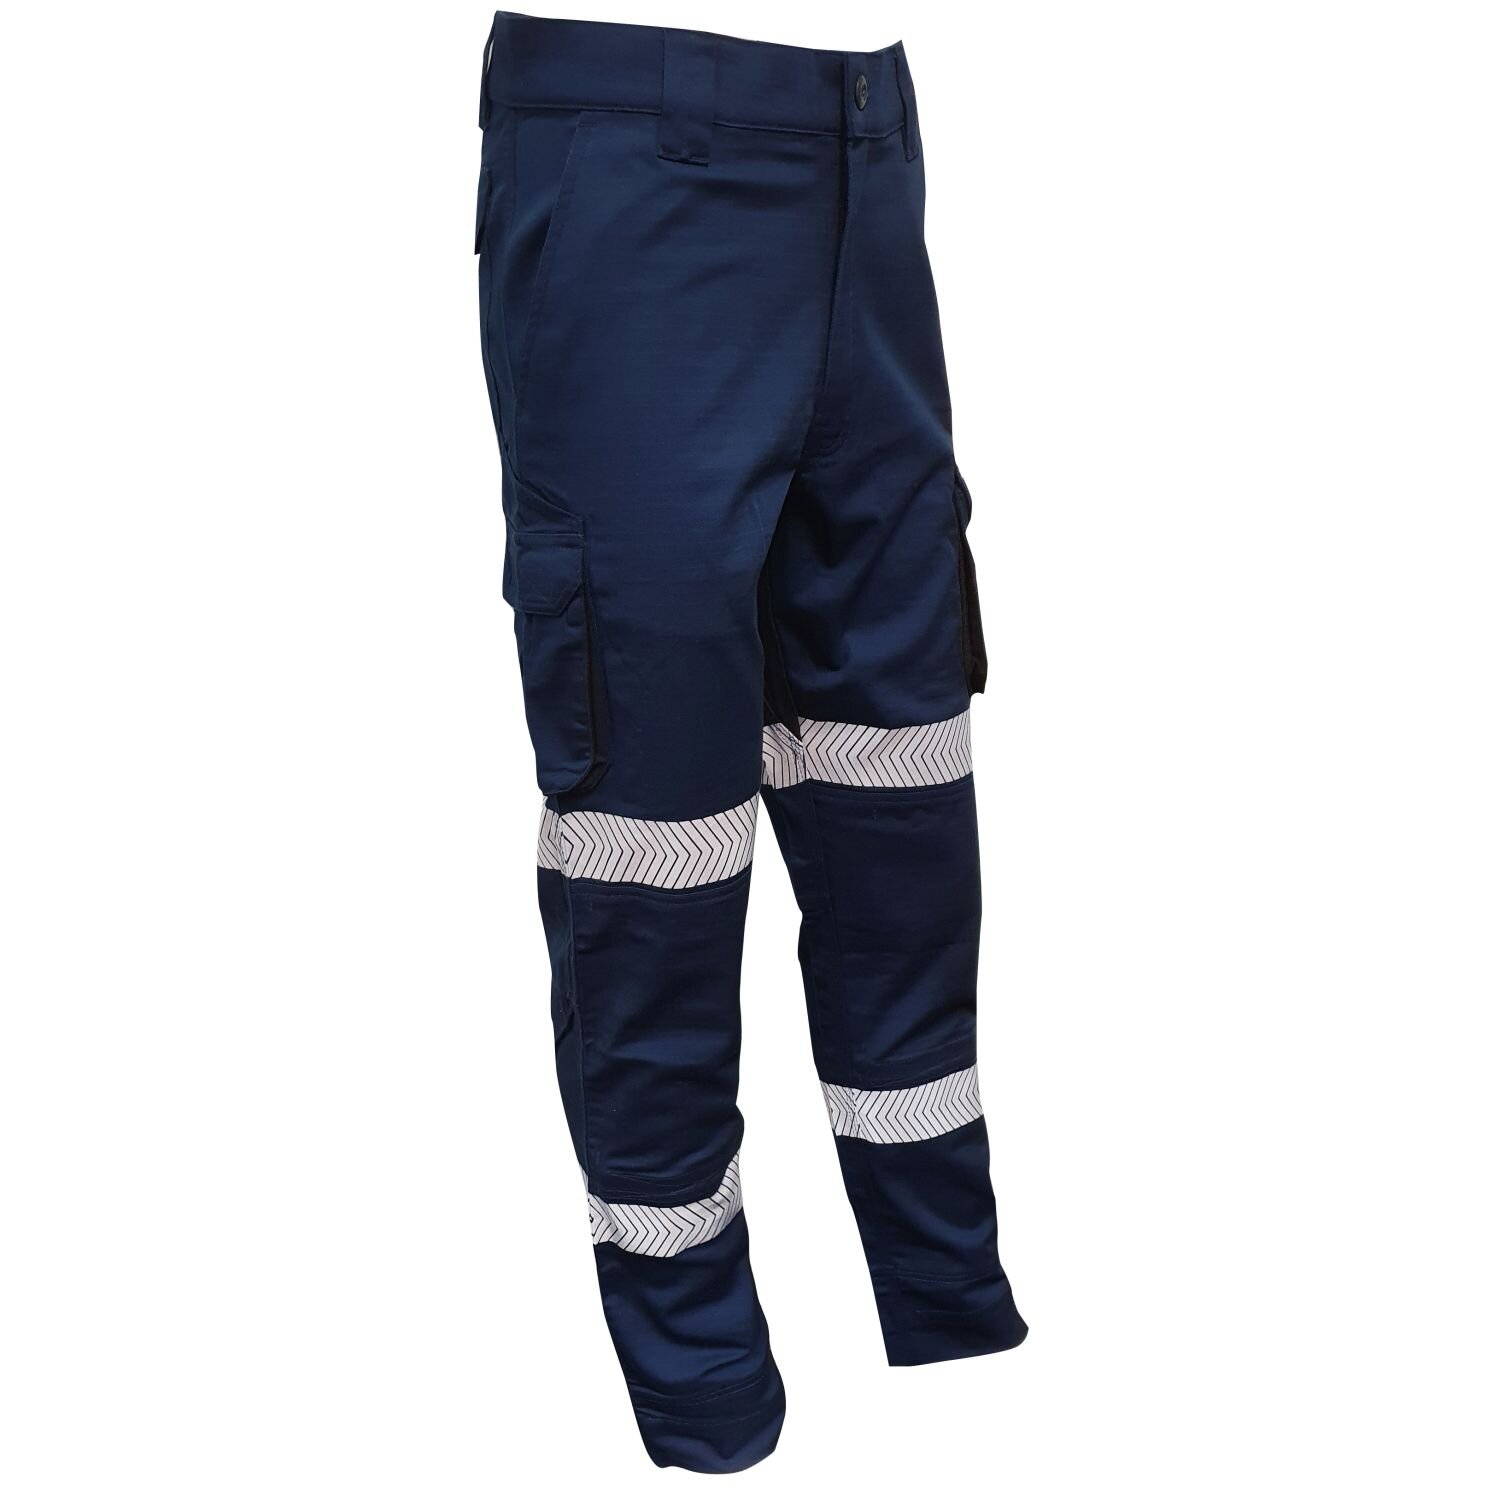 Techni Vision Hi Vis Segment Tape Lightweight Stretch Ripstop Vented Cargo Trouser with 4 Way Stretch Panel